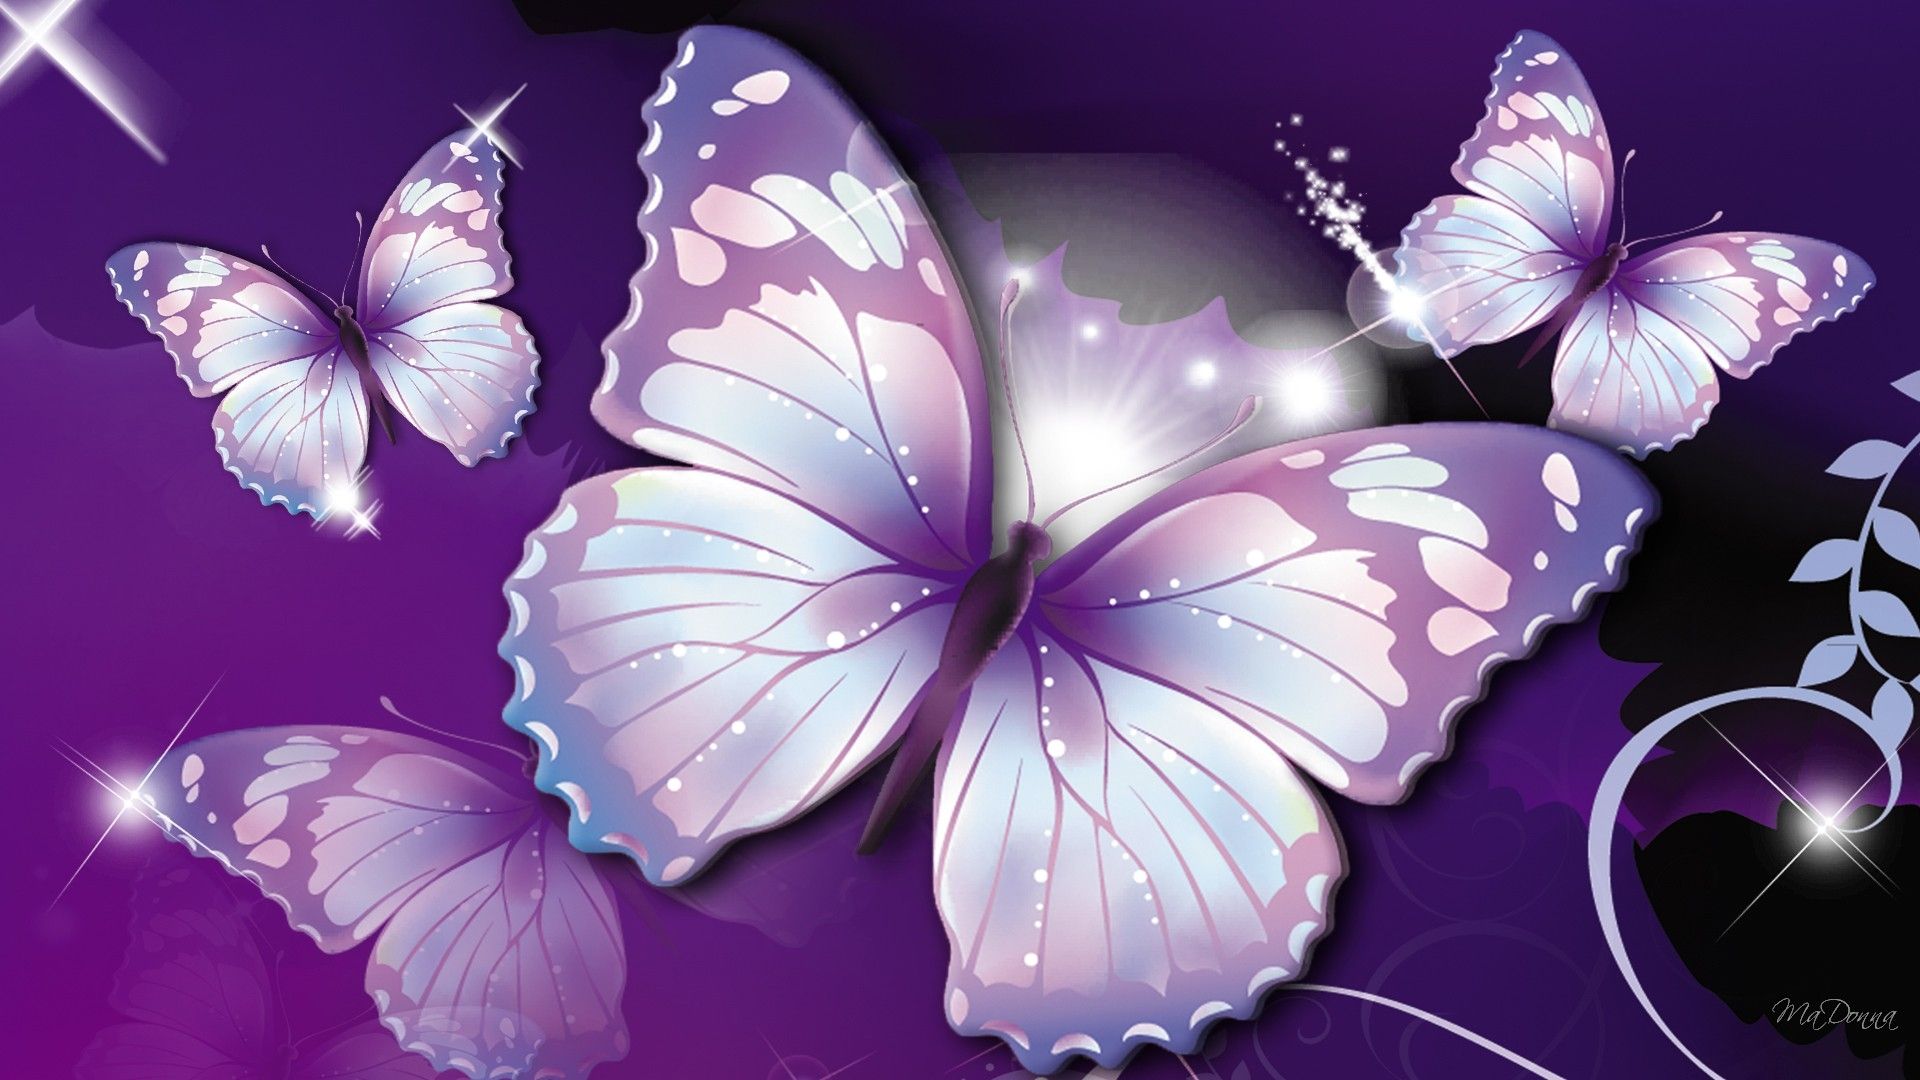 purple butterfly wallpaper Images  Sneha 463813364 on ShareChat